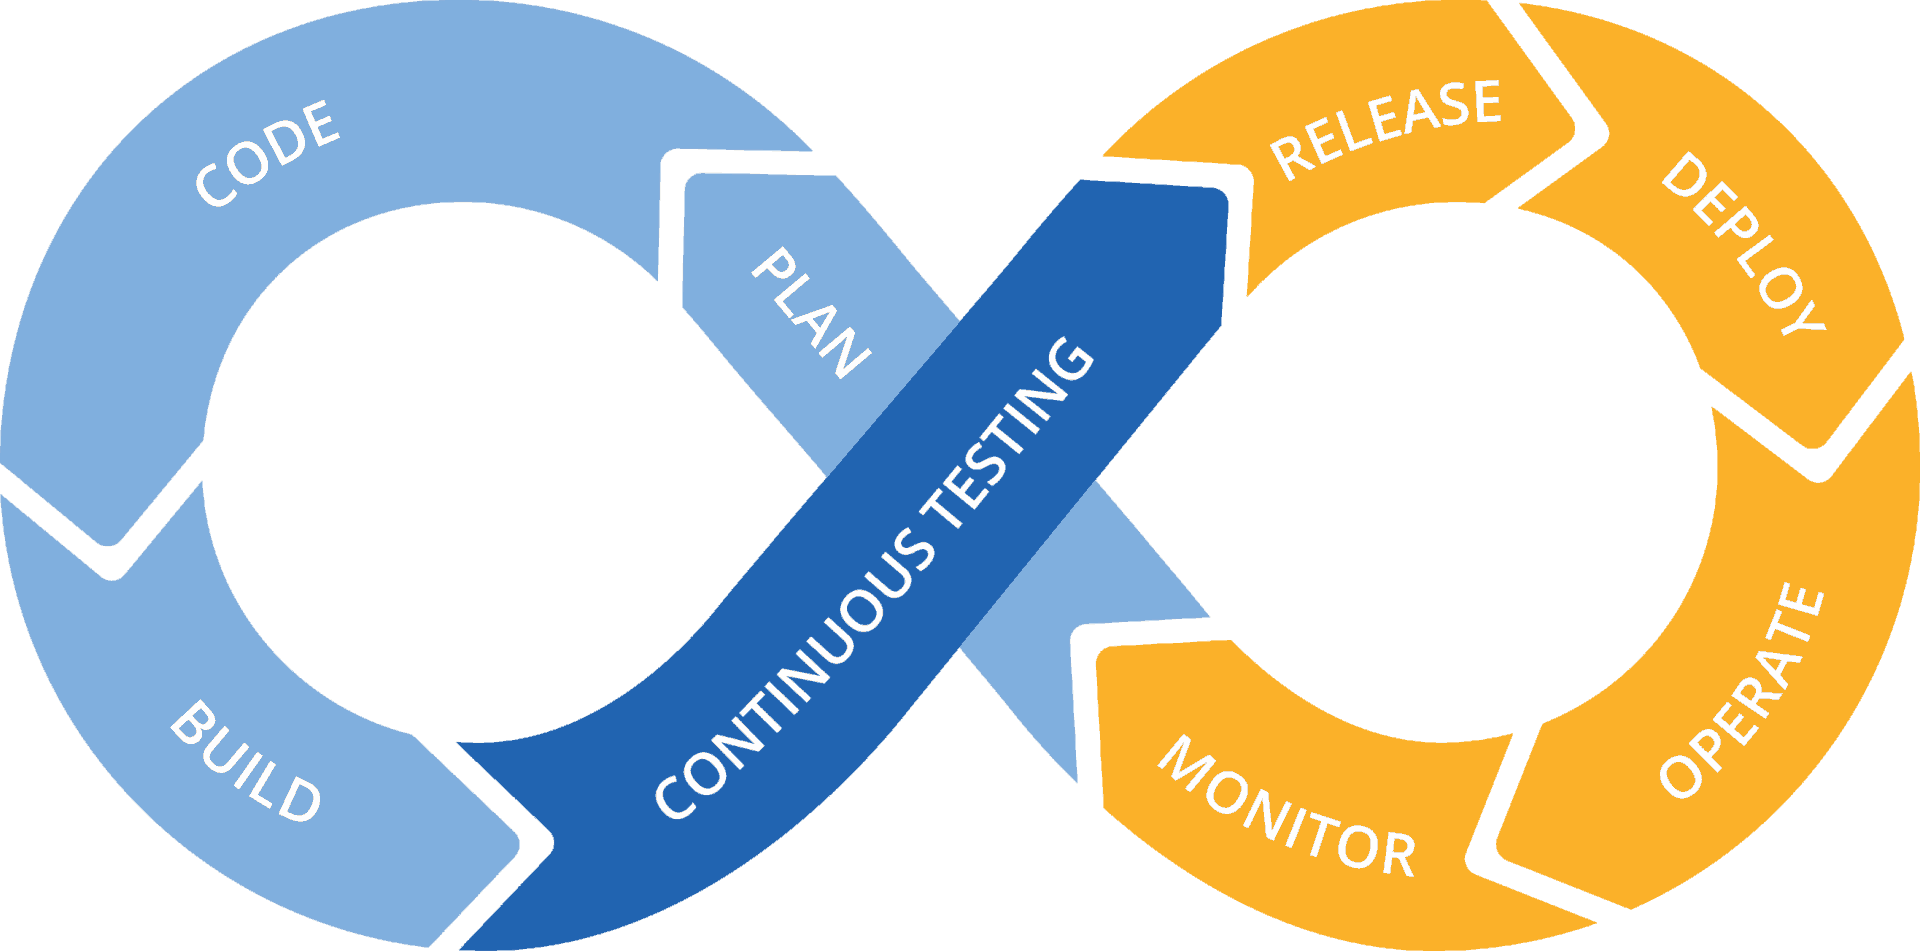 continuous testing